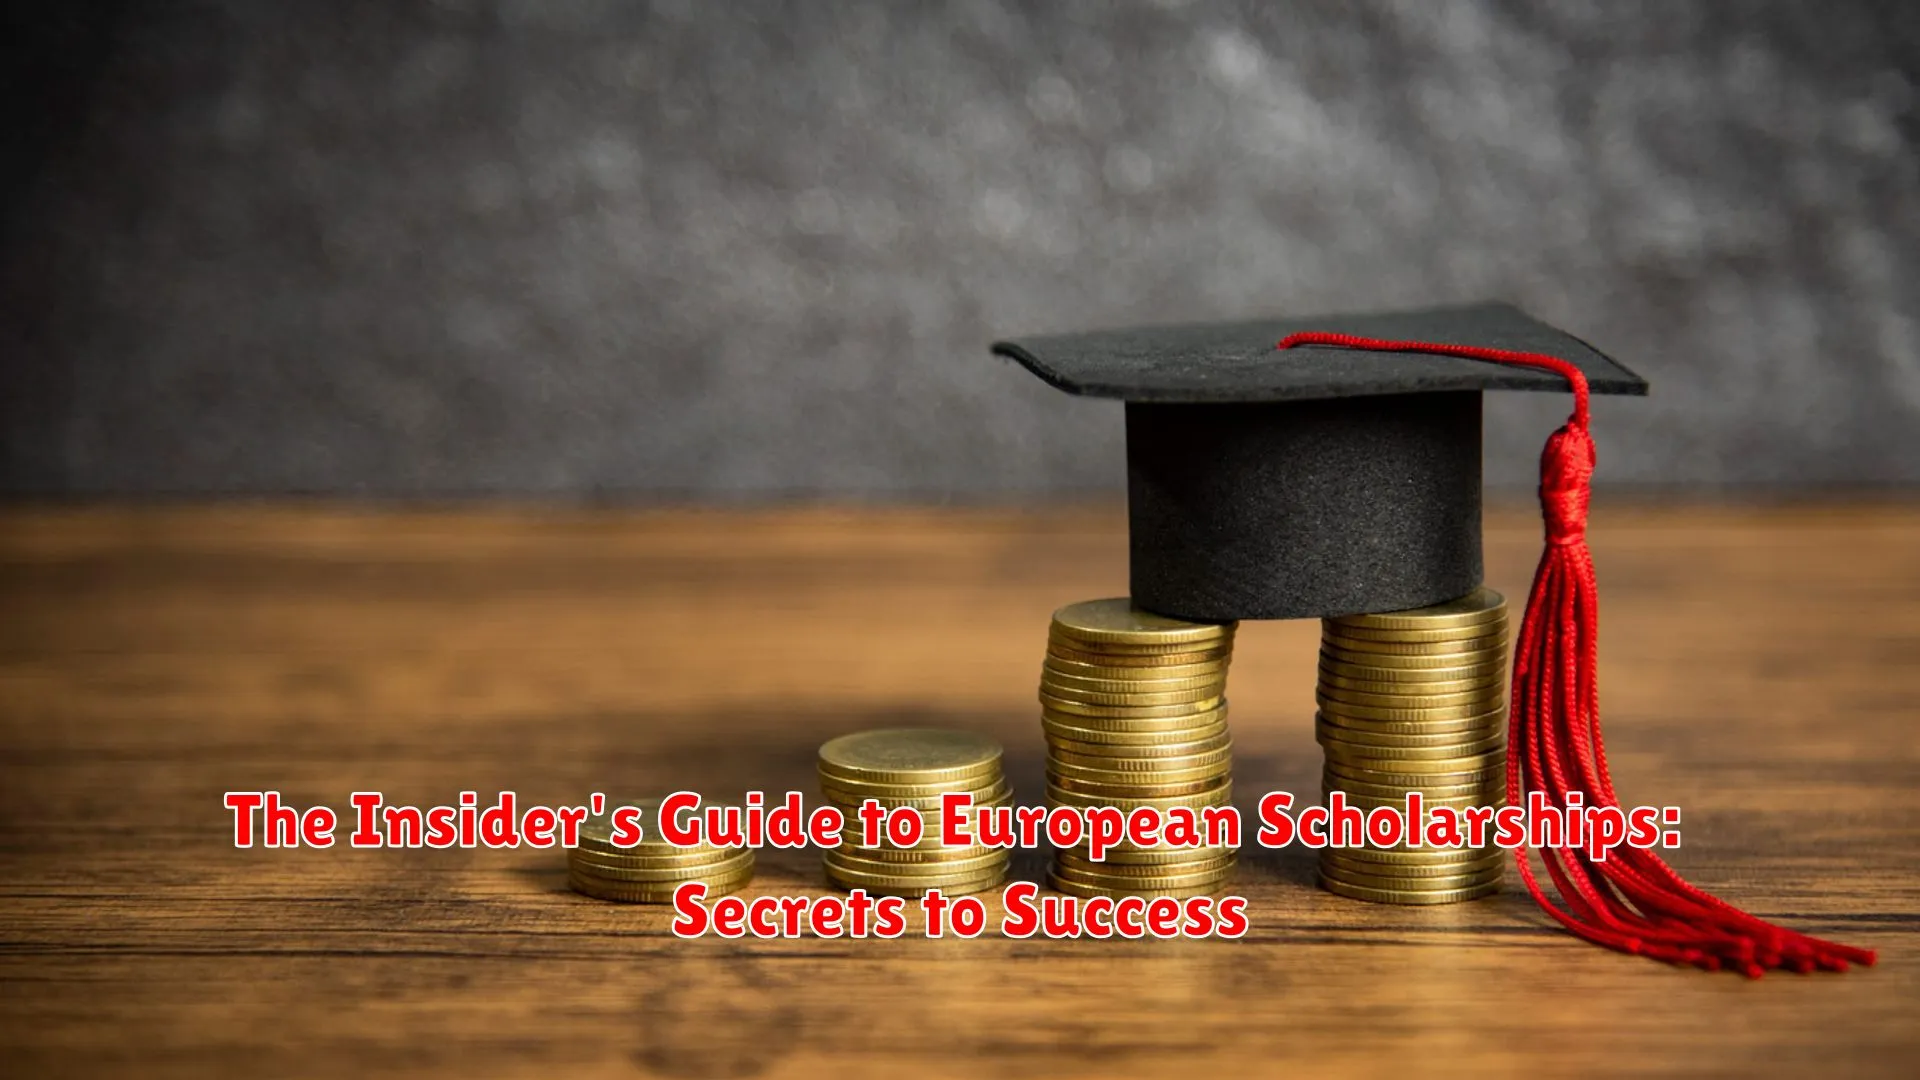 The Insider's Guide to European Scholarships: Secrets to Success